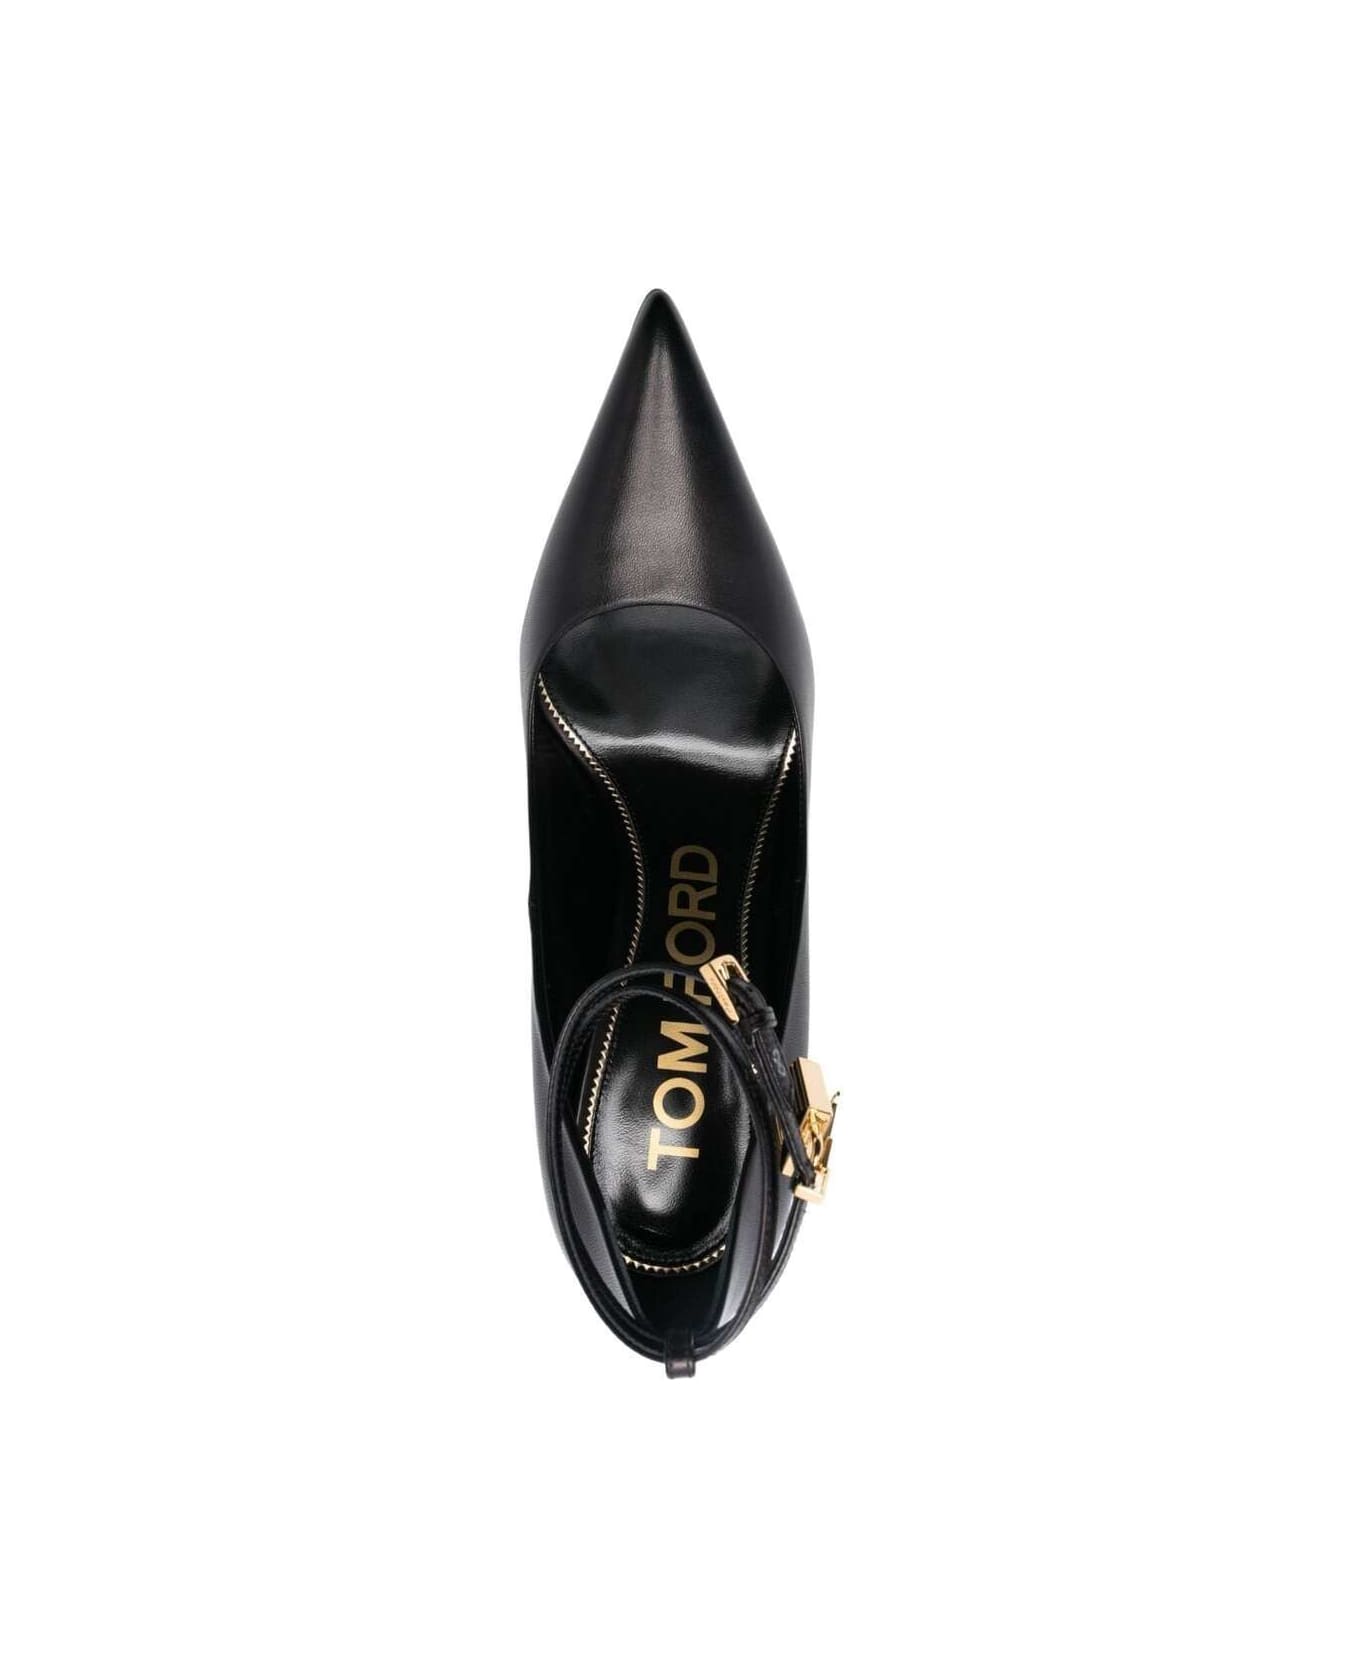 Tom Ford Black Pumps With Padlock Detail In Smooth Leather Woman - Black